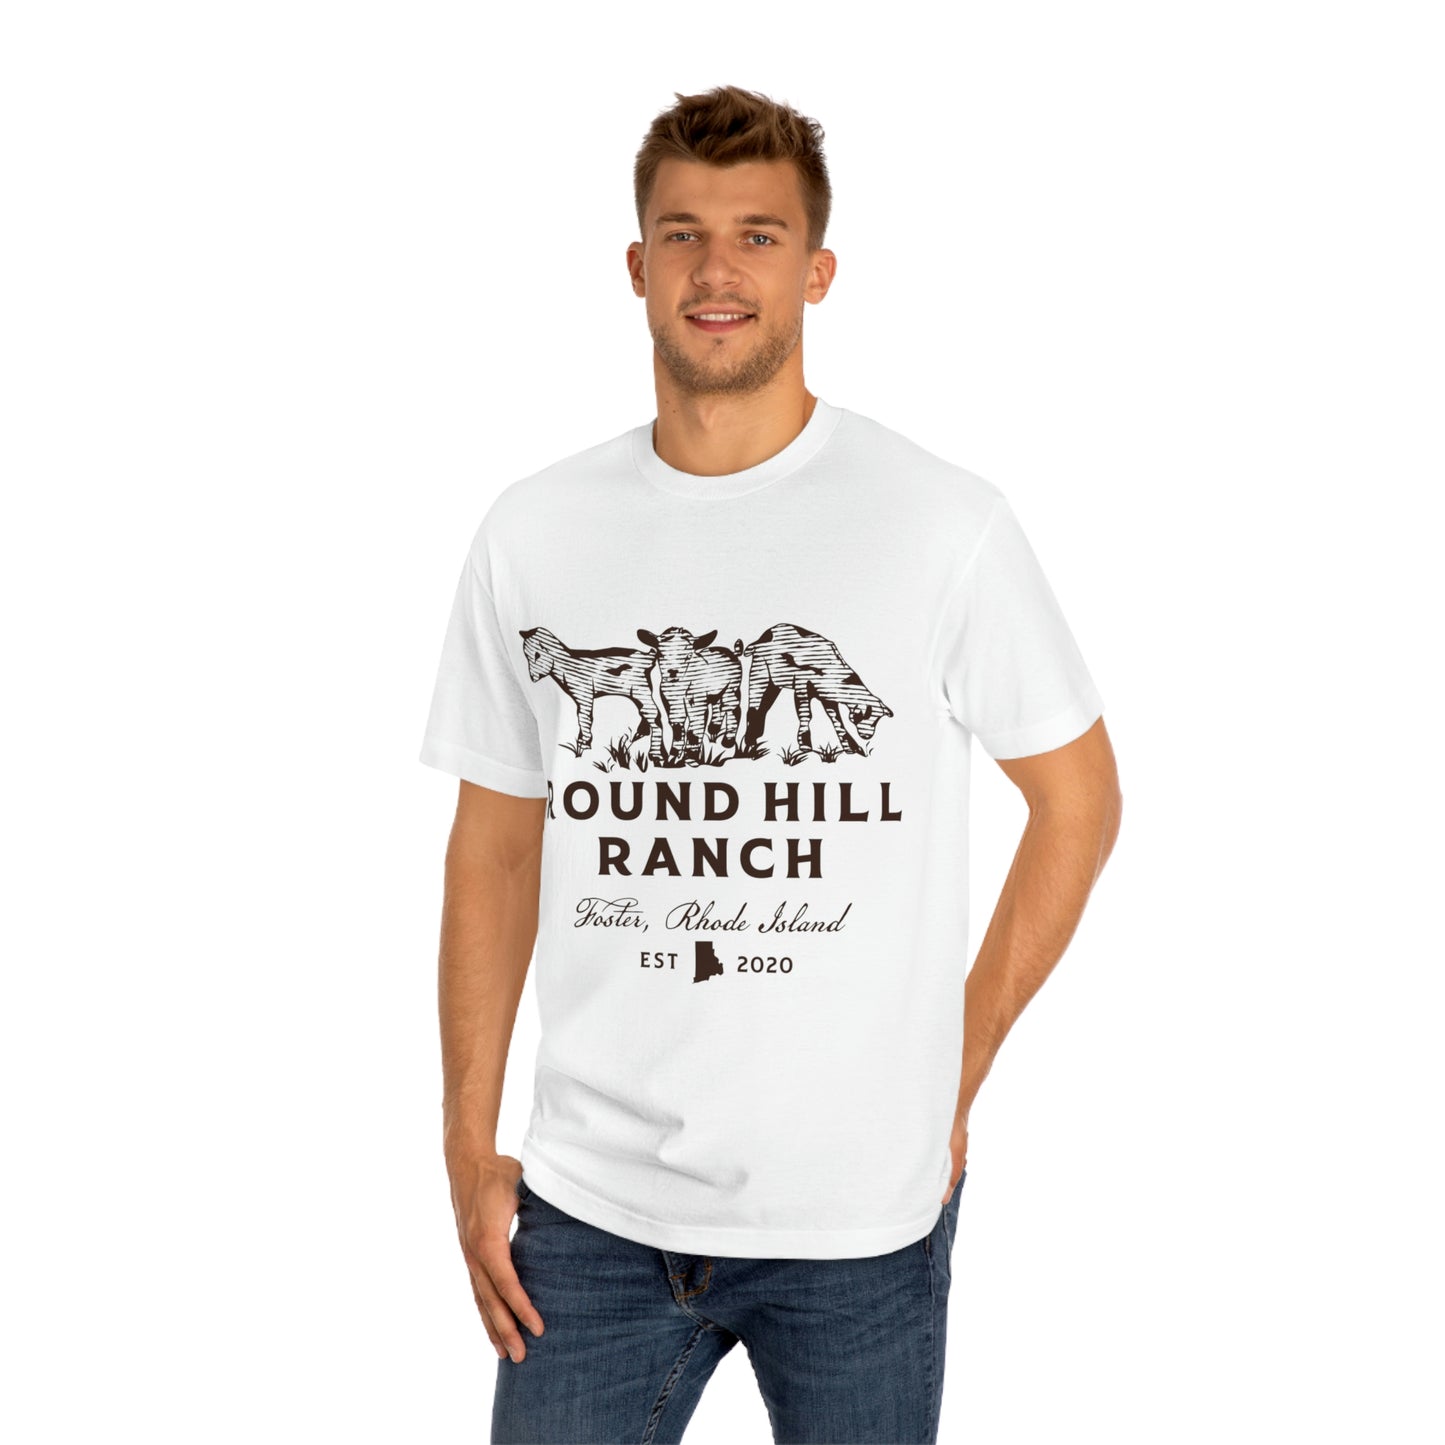 Round Hill Ranch Goat Tee